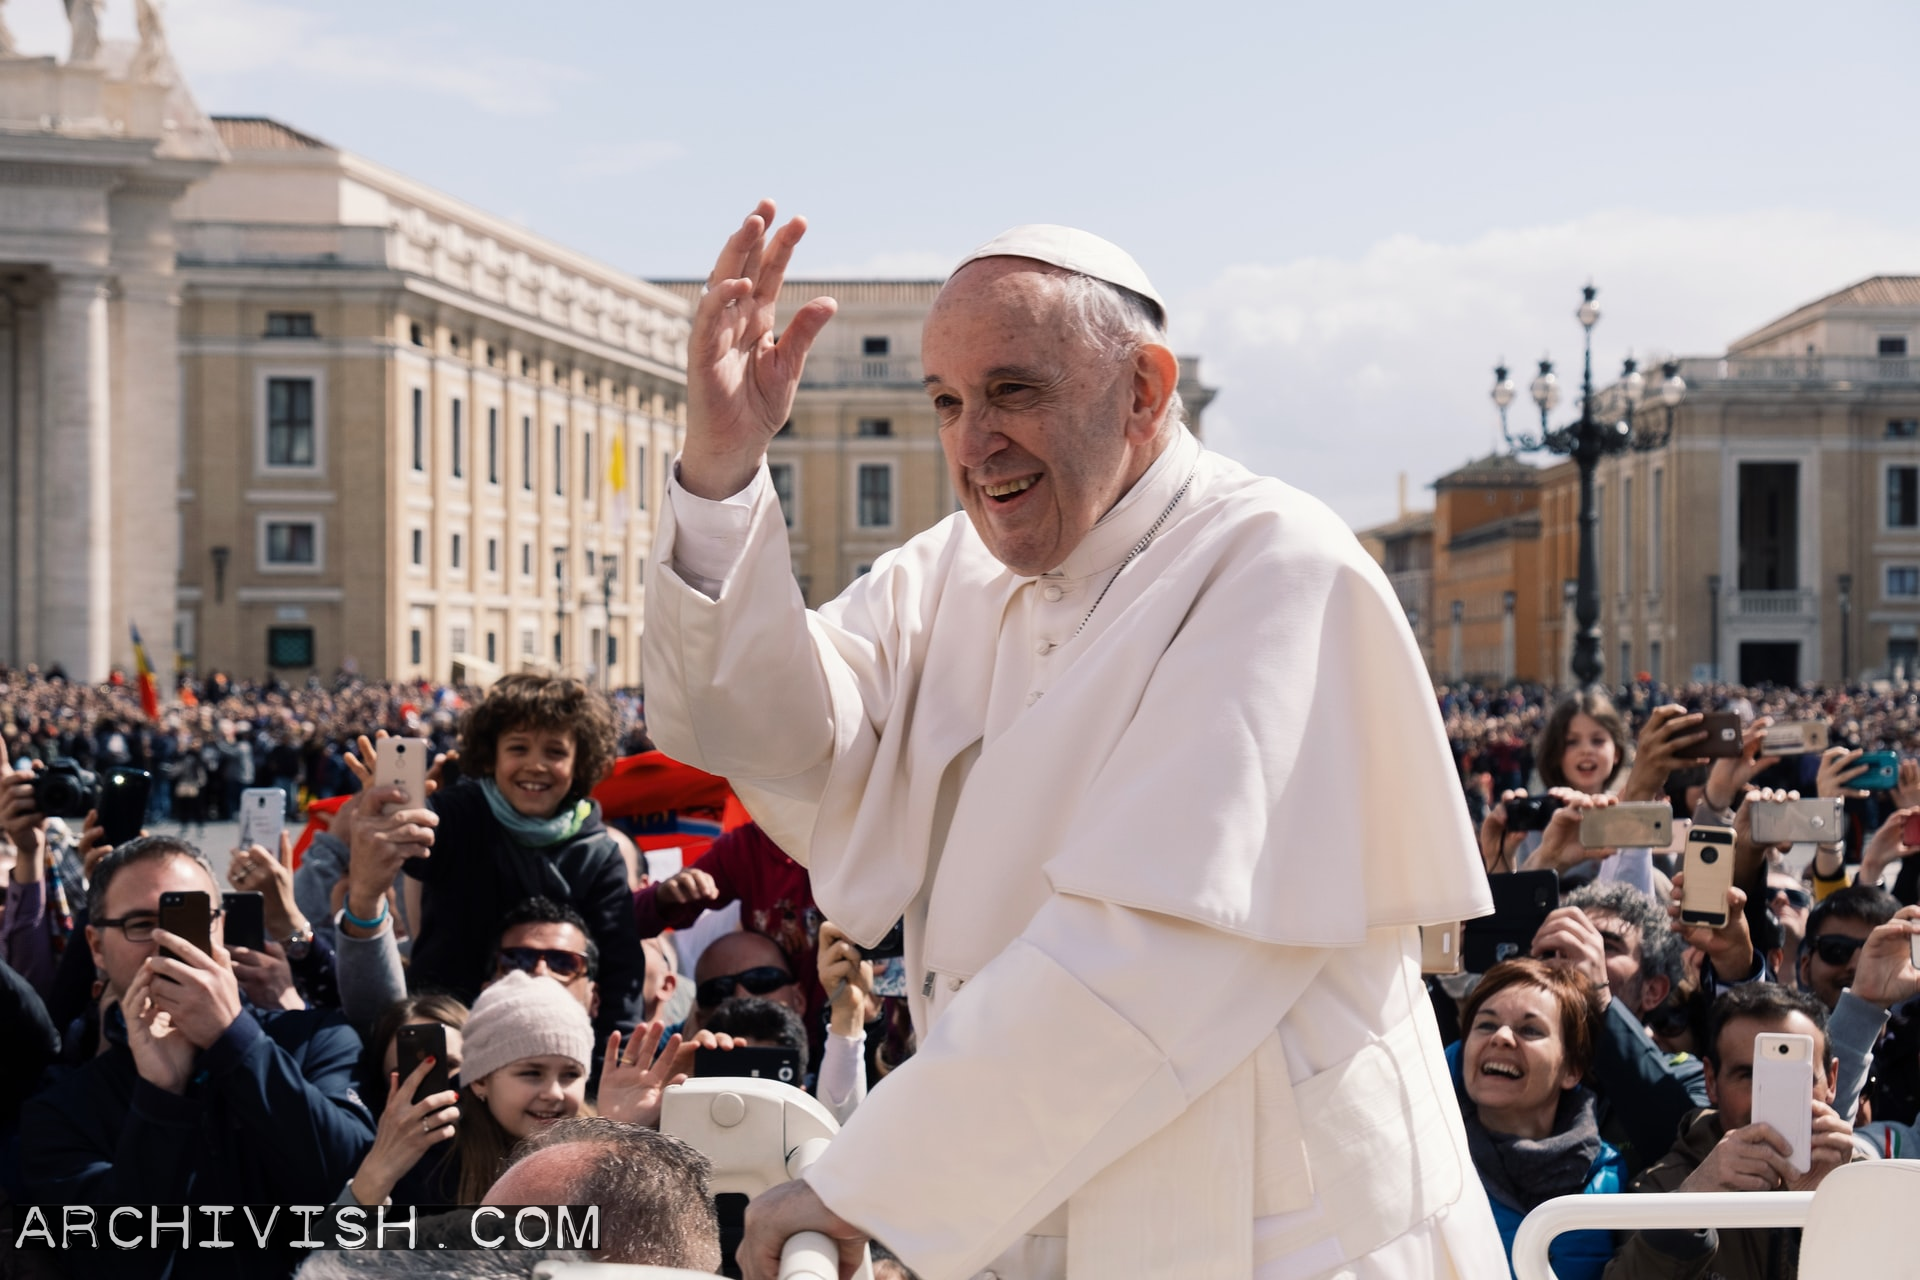 The pope greets the people from an open popemobile